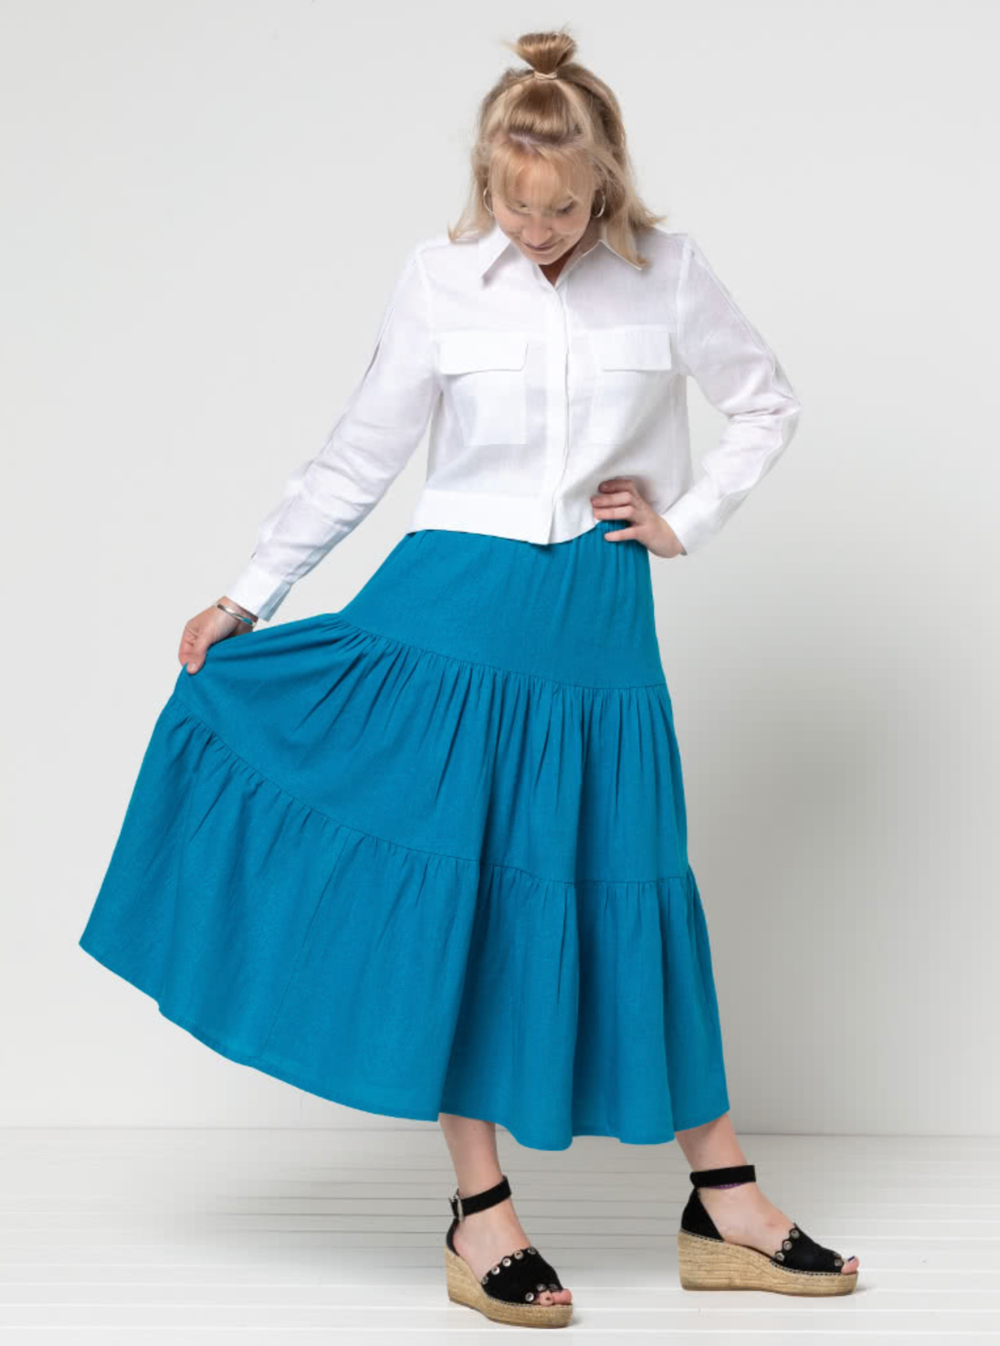 Woman wearing the Lila Tiered Skirt sewing pattern from Style Arc on The Fold Line. A Skirt pattern made in silk, rayon, crepe or washed linen fabrics, featuring a midi length, three gathered tiers and elasticated waist.